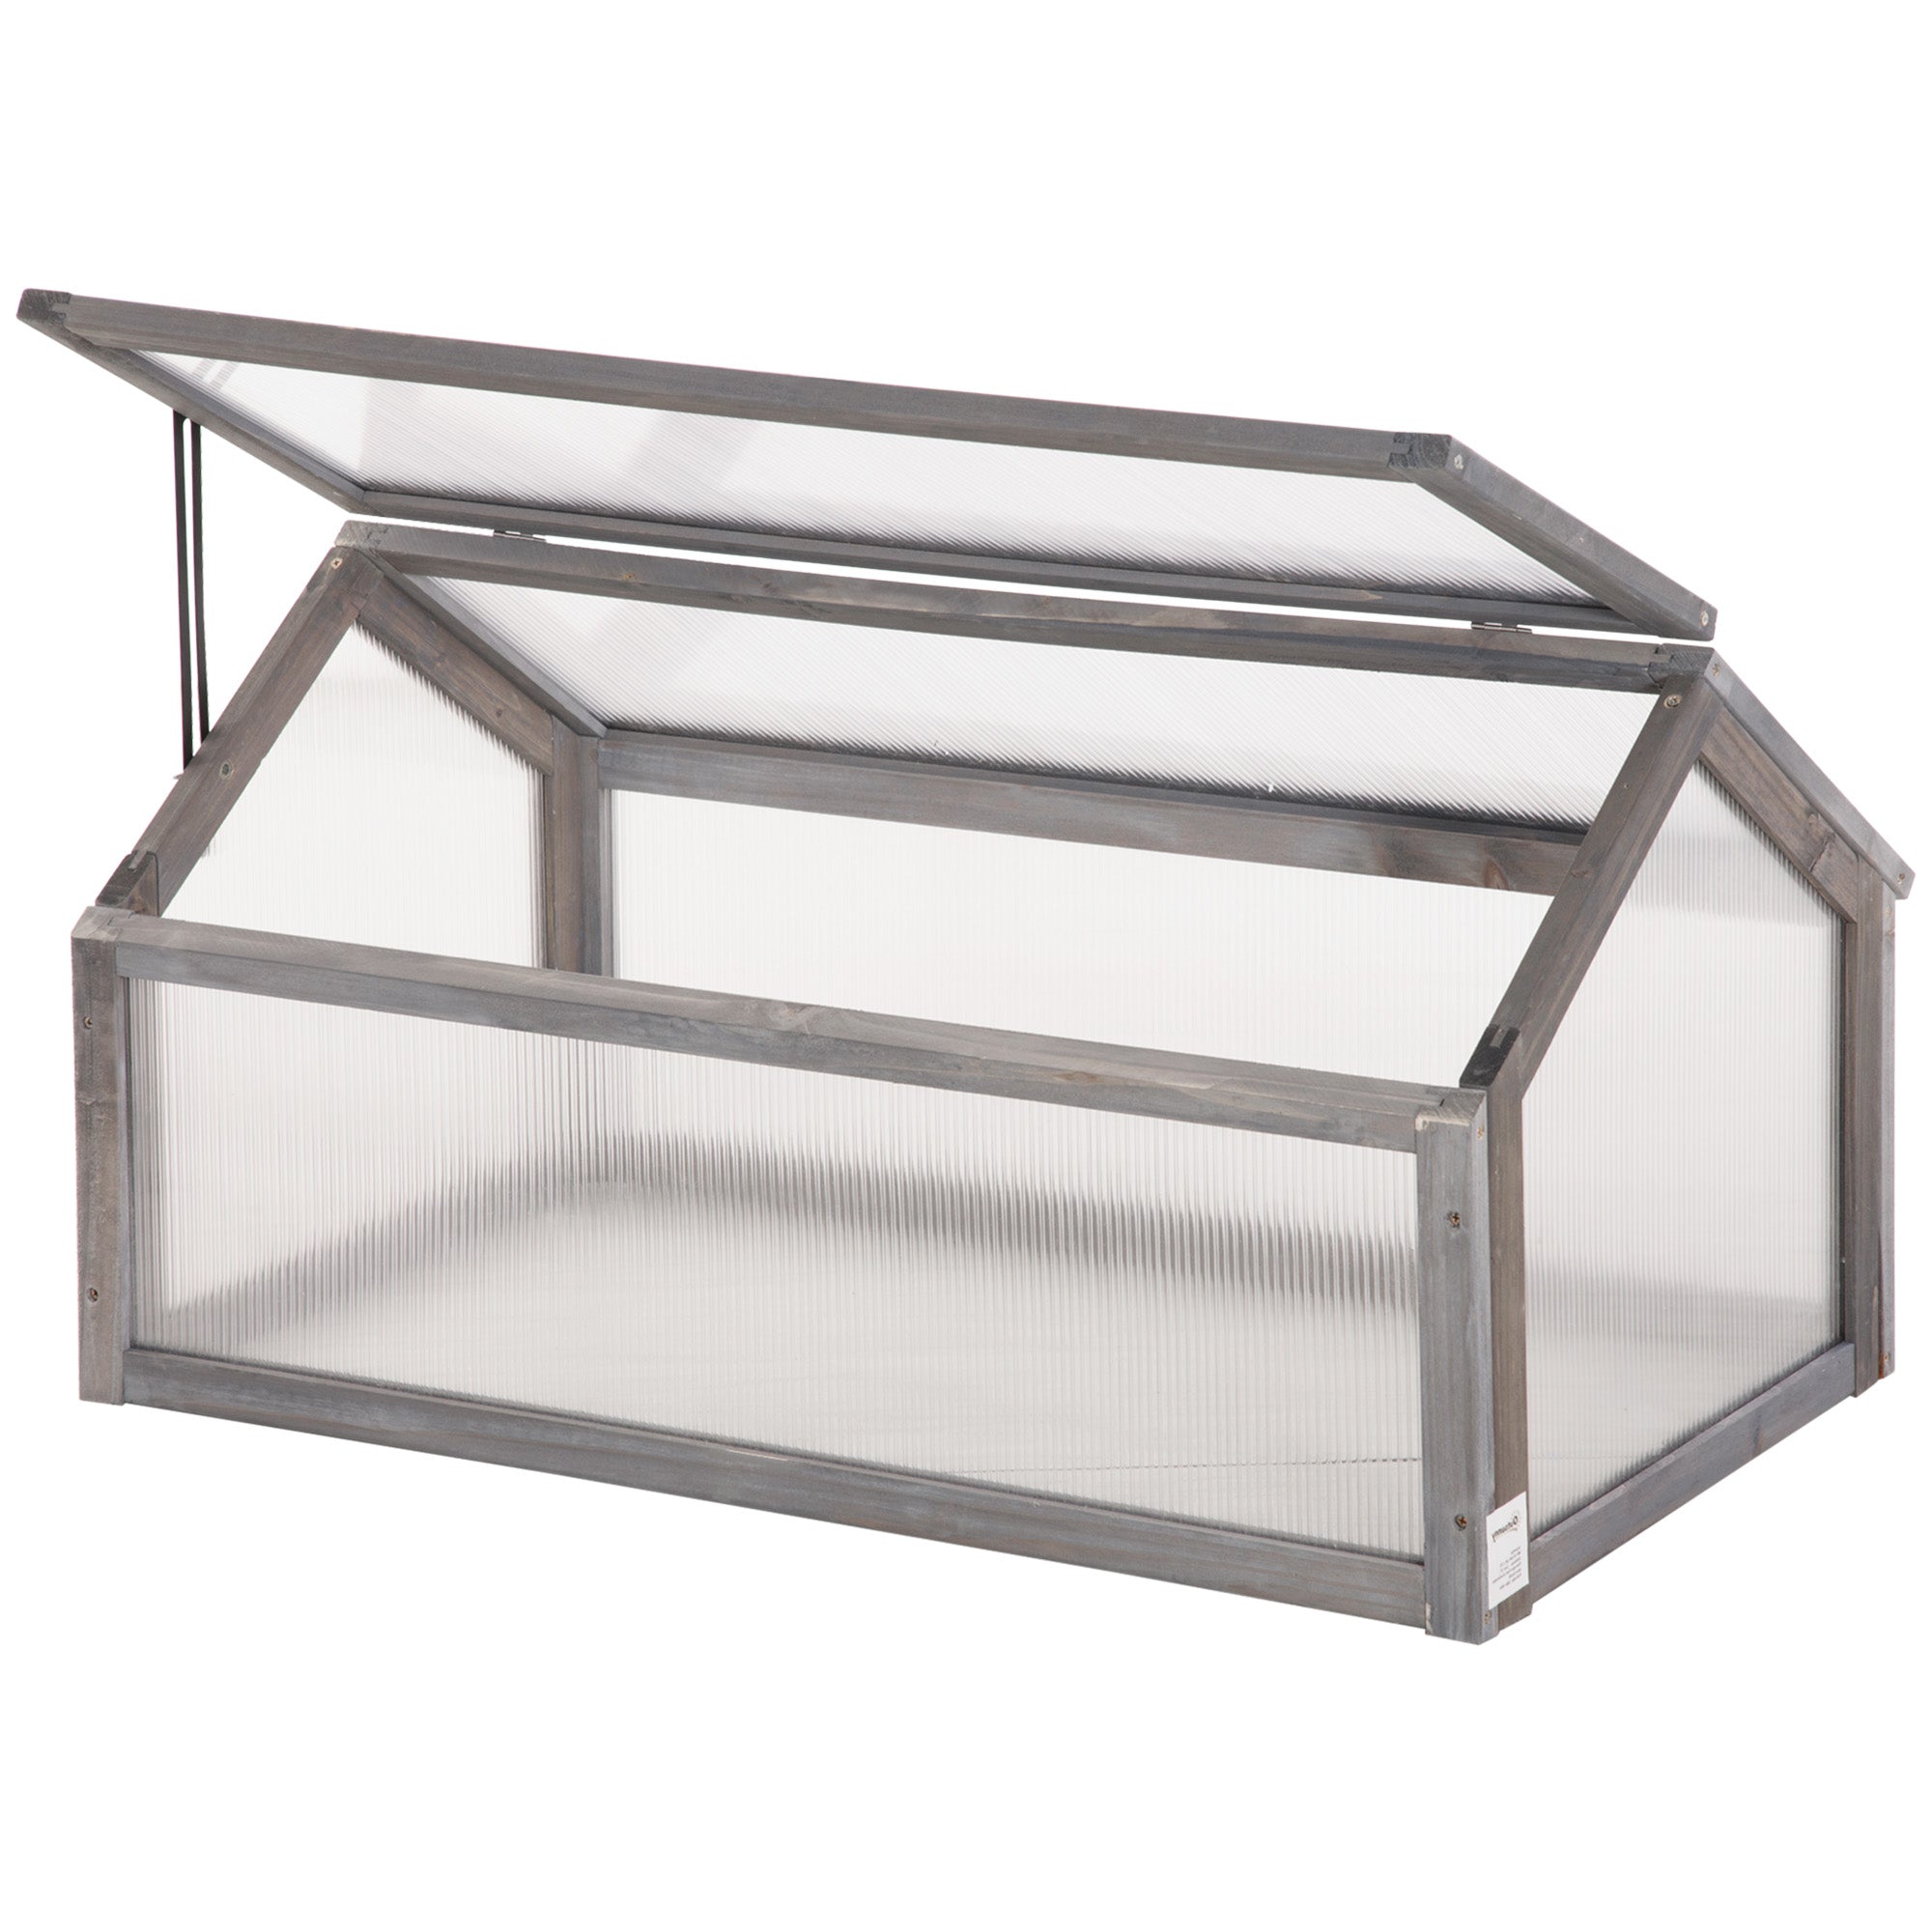 Outsunny Wooden Cold Frame Greenhouse Garden Polycarbonate Grow House - Grey  | TJ Hughes